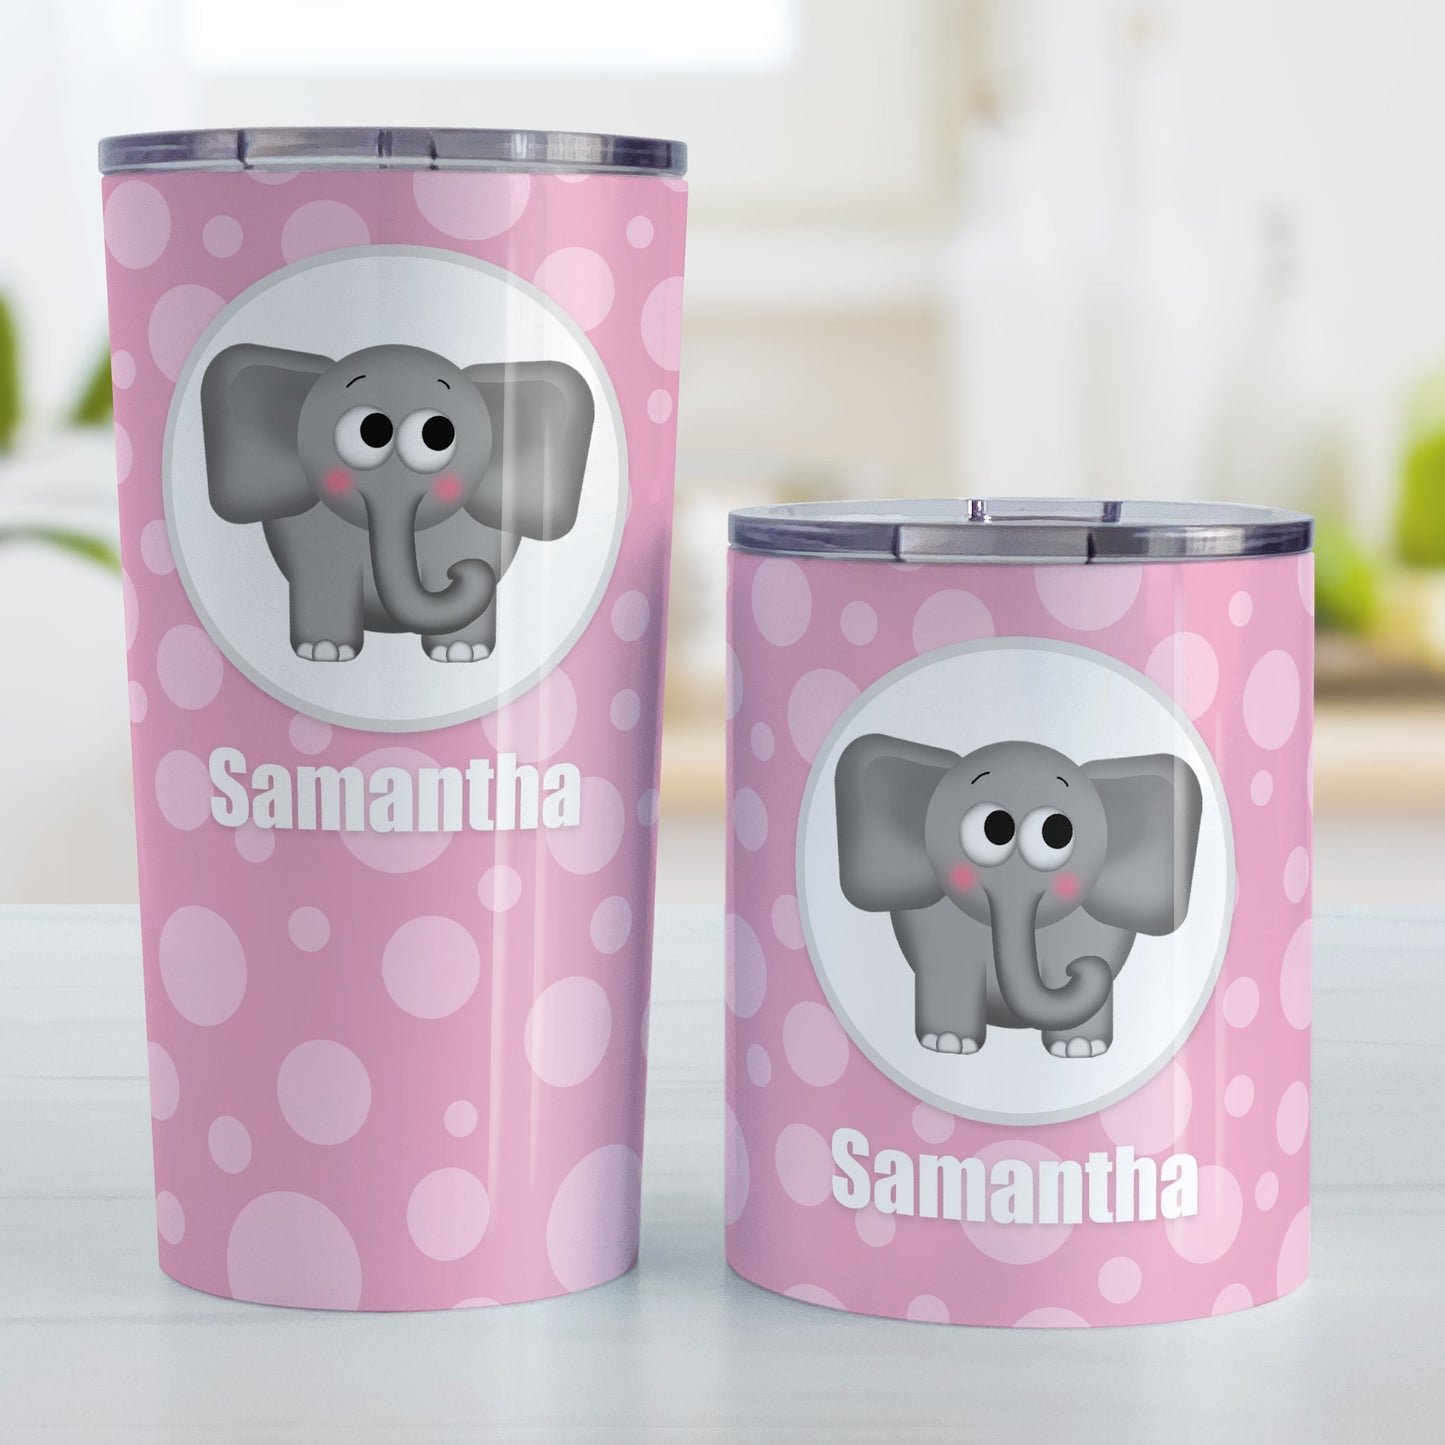 Cute Elephant Bubbly Pink Personalized Tumbler Cup (20oz and 10oz, stainless steel insulated) at Amy's Coffee Mugs